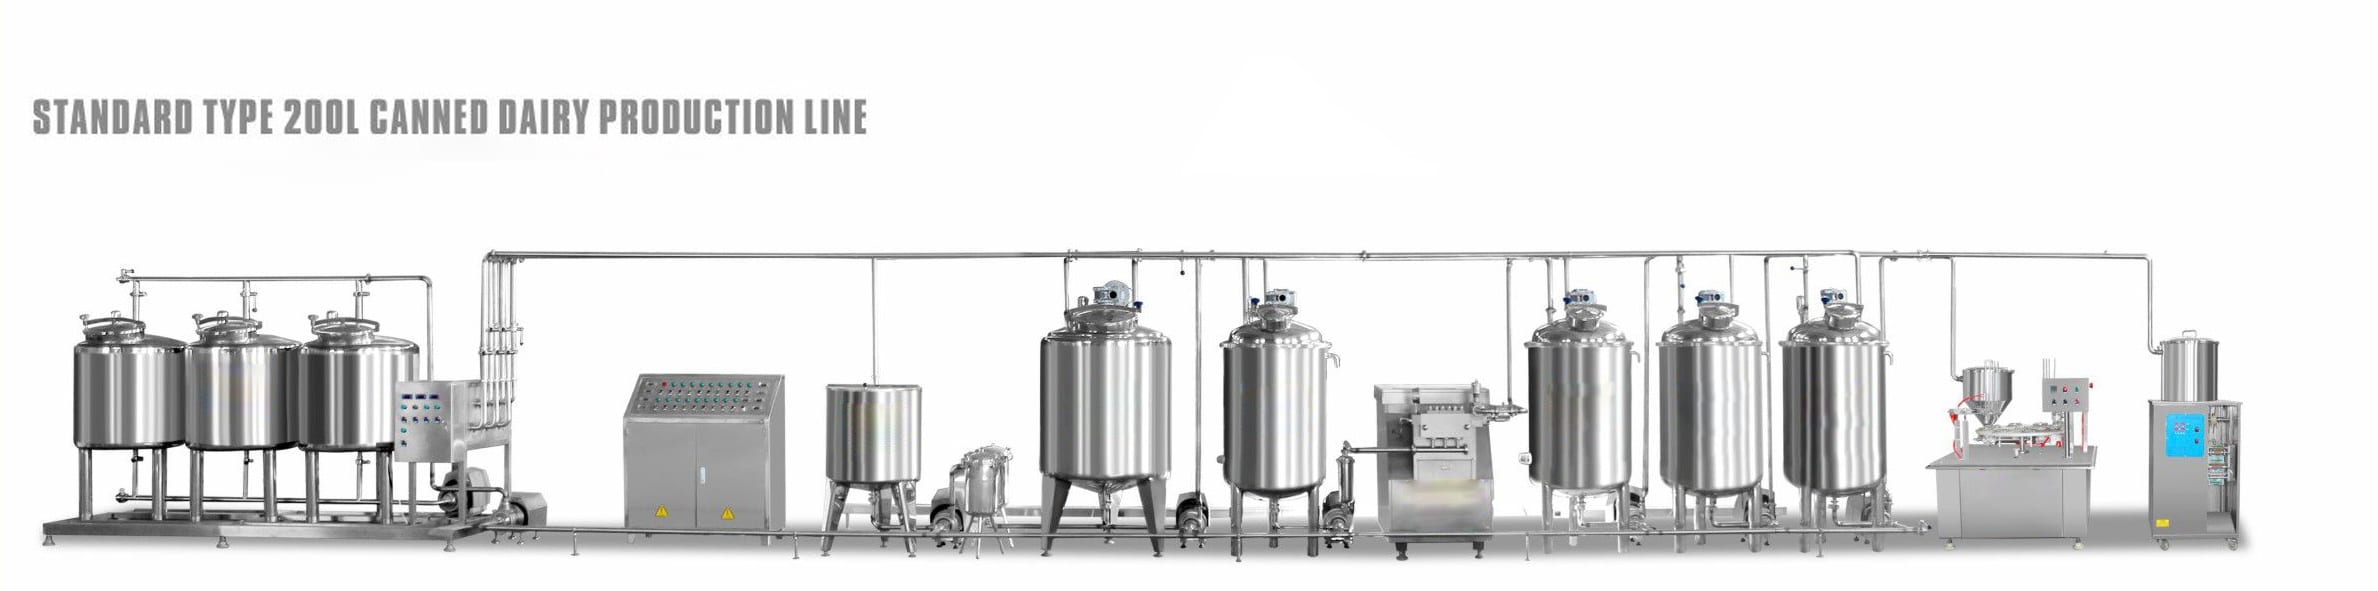 Standard type 200l canned dairy production line